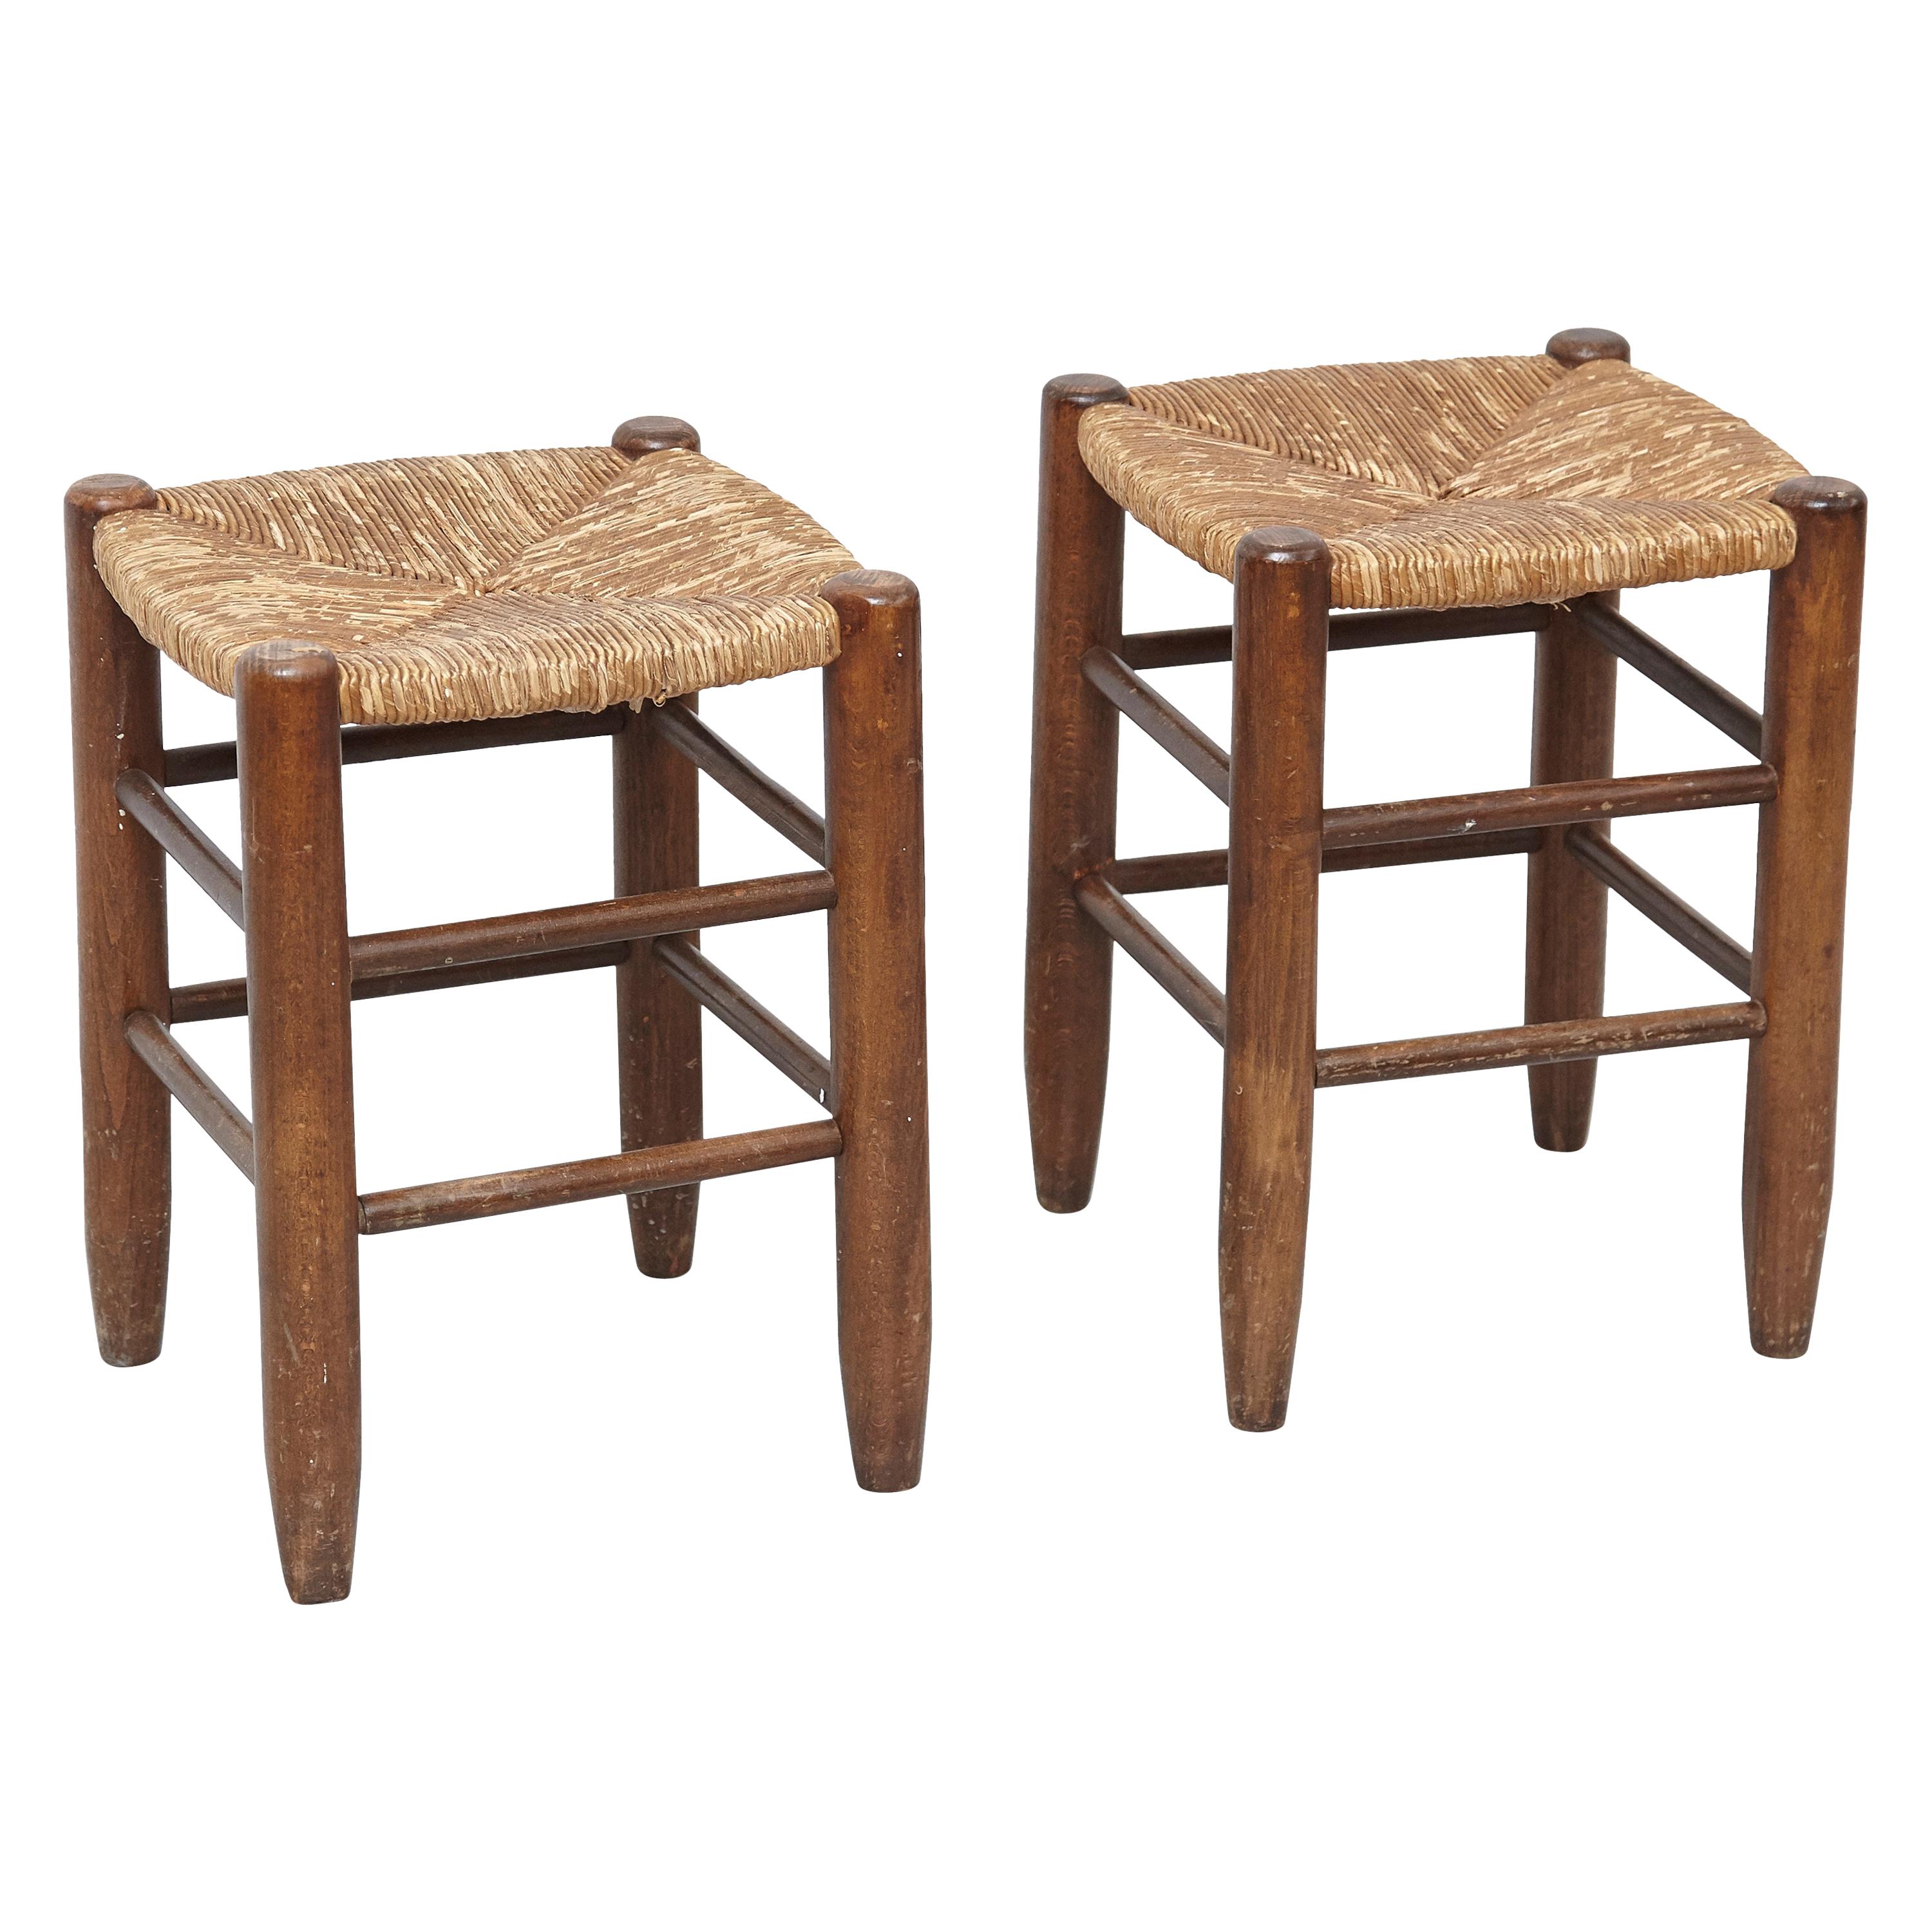 Pair of Charlotte Perriand, Mid-Century Modern, Rattan Wood French Stools